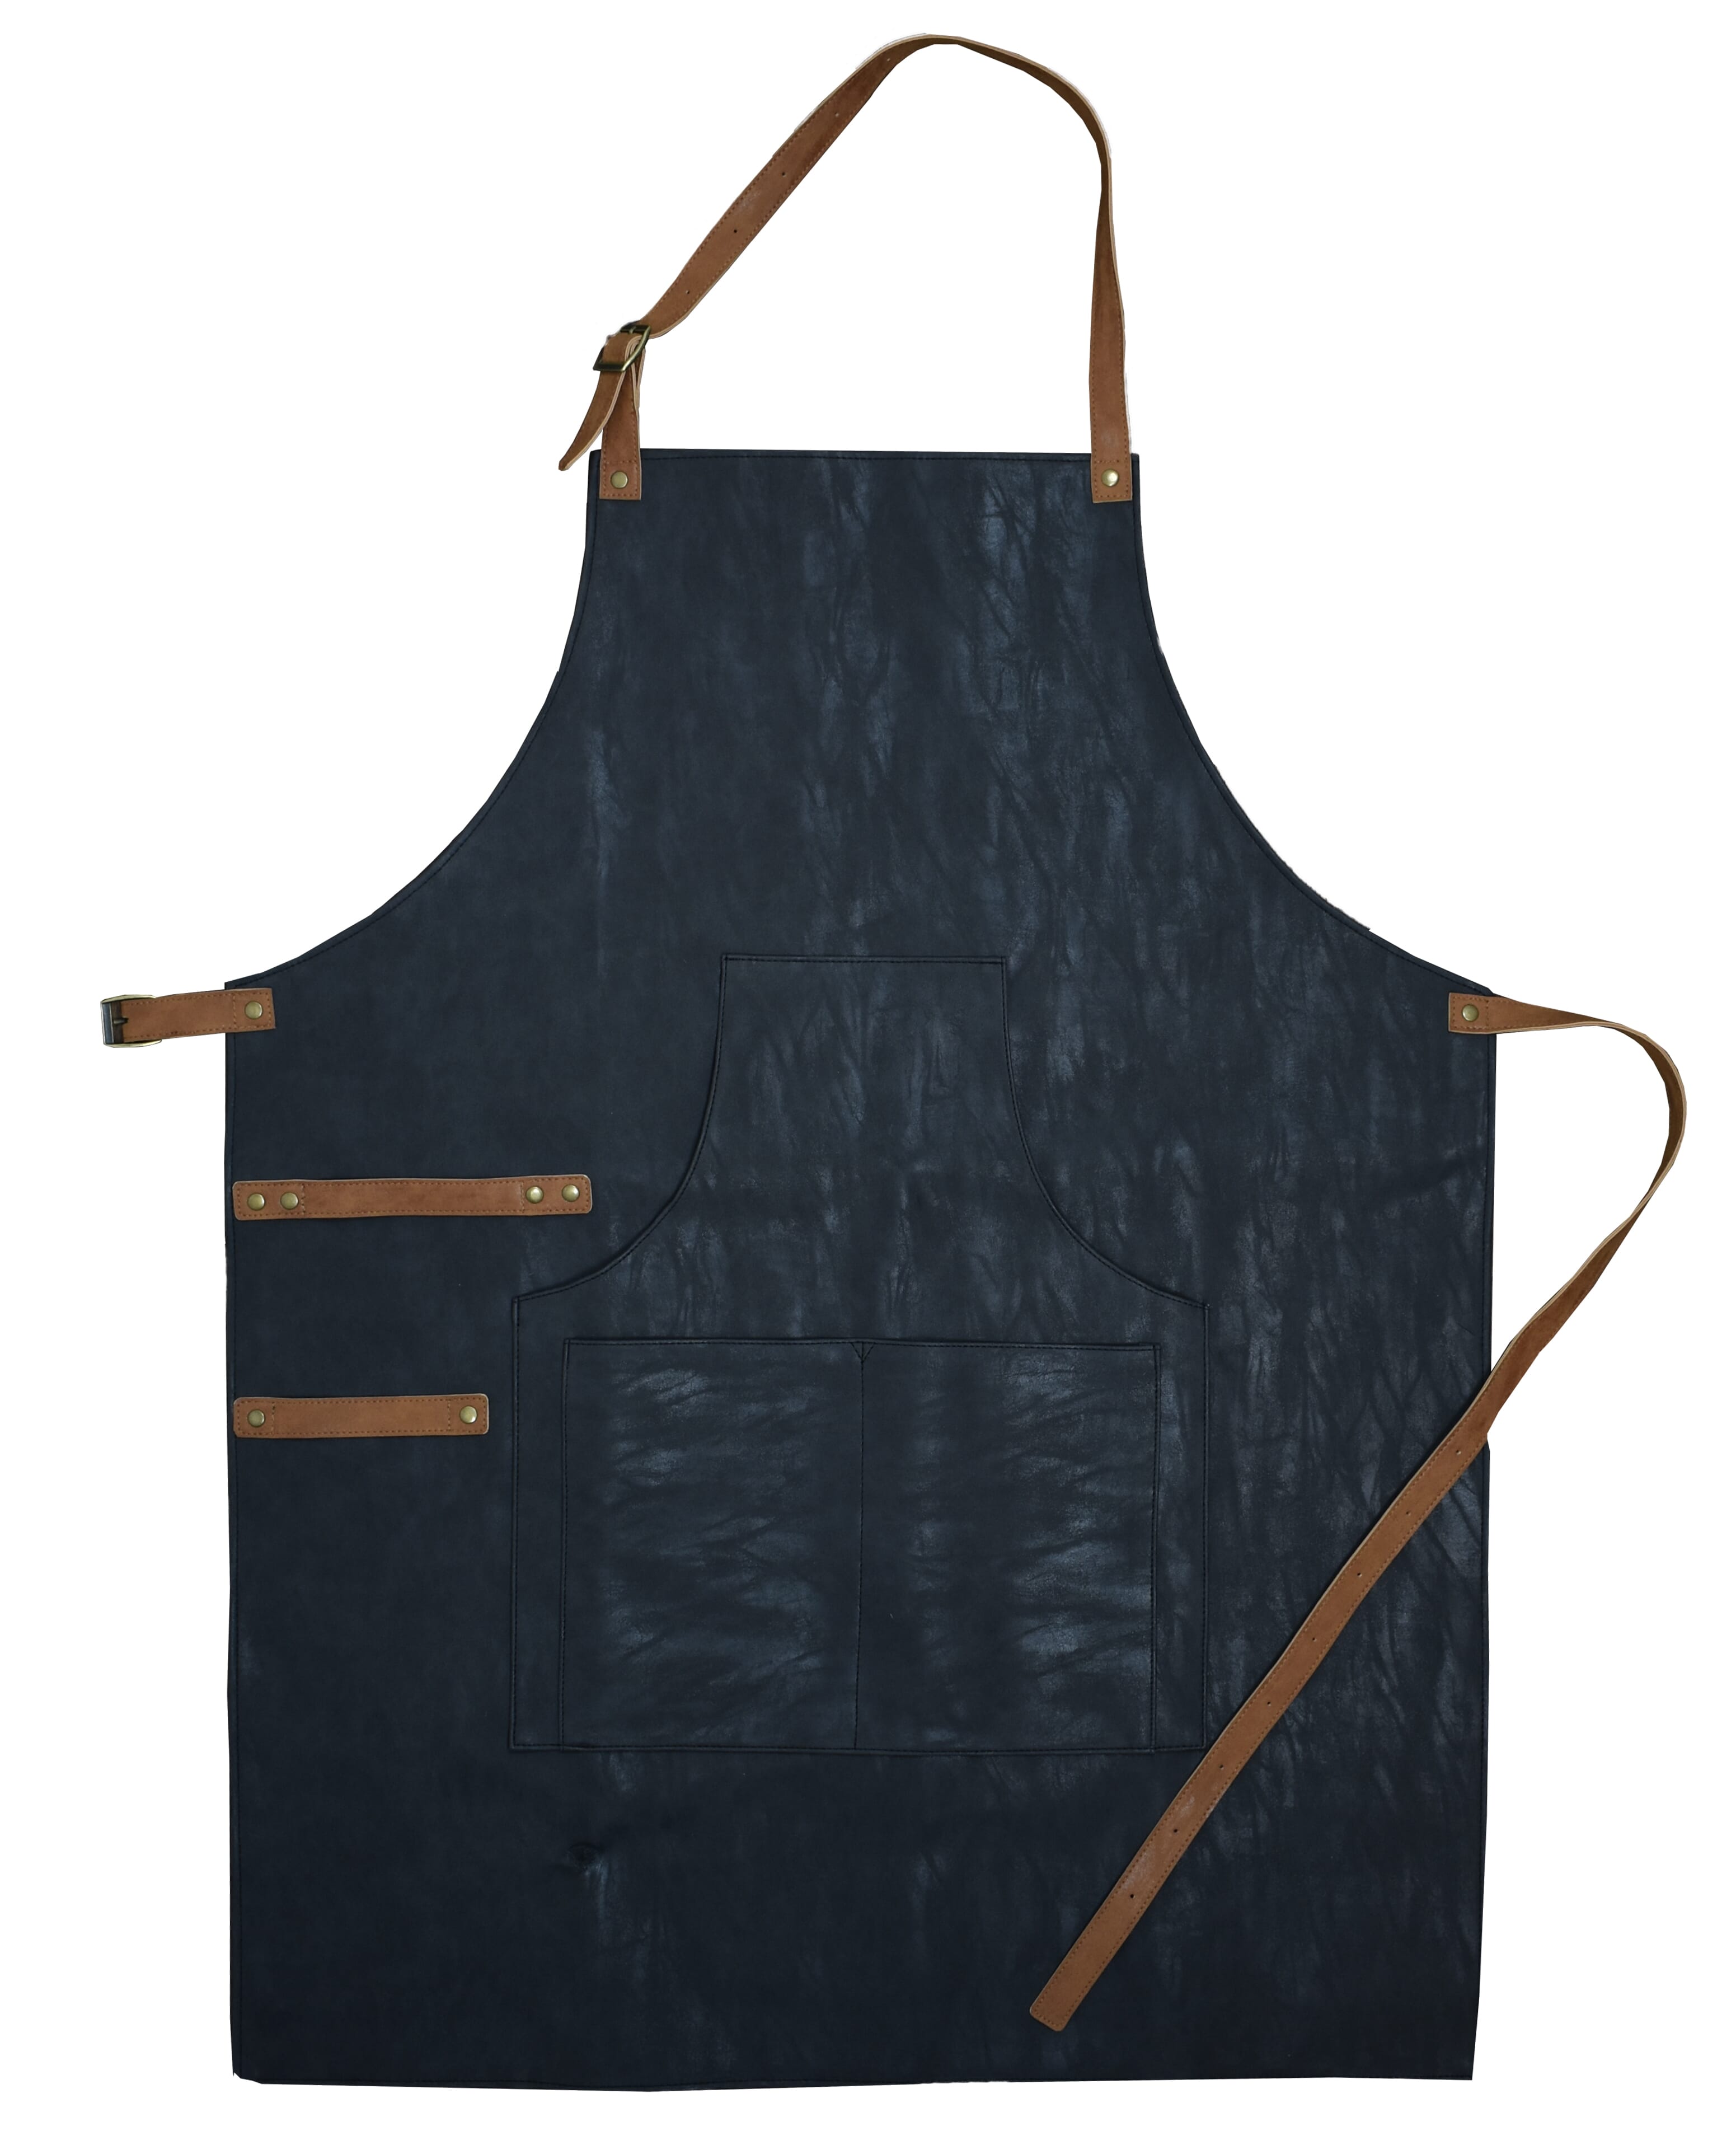 A kitchen apron that features storage for cooking utensils - Addlethorpe - Whitchurch Canonicorum